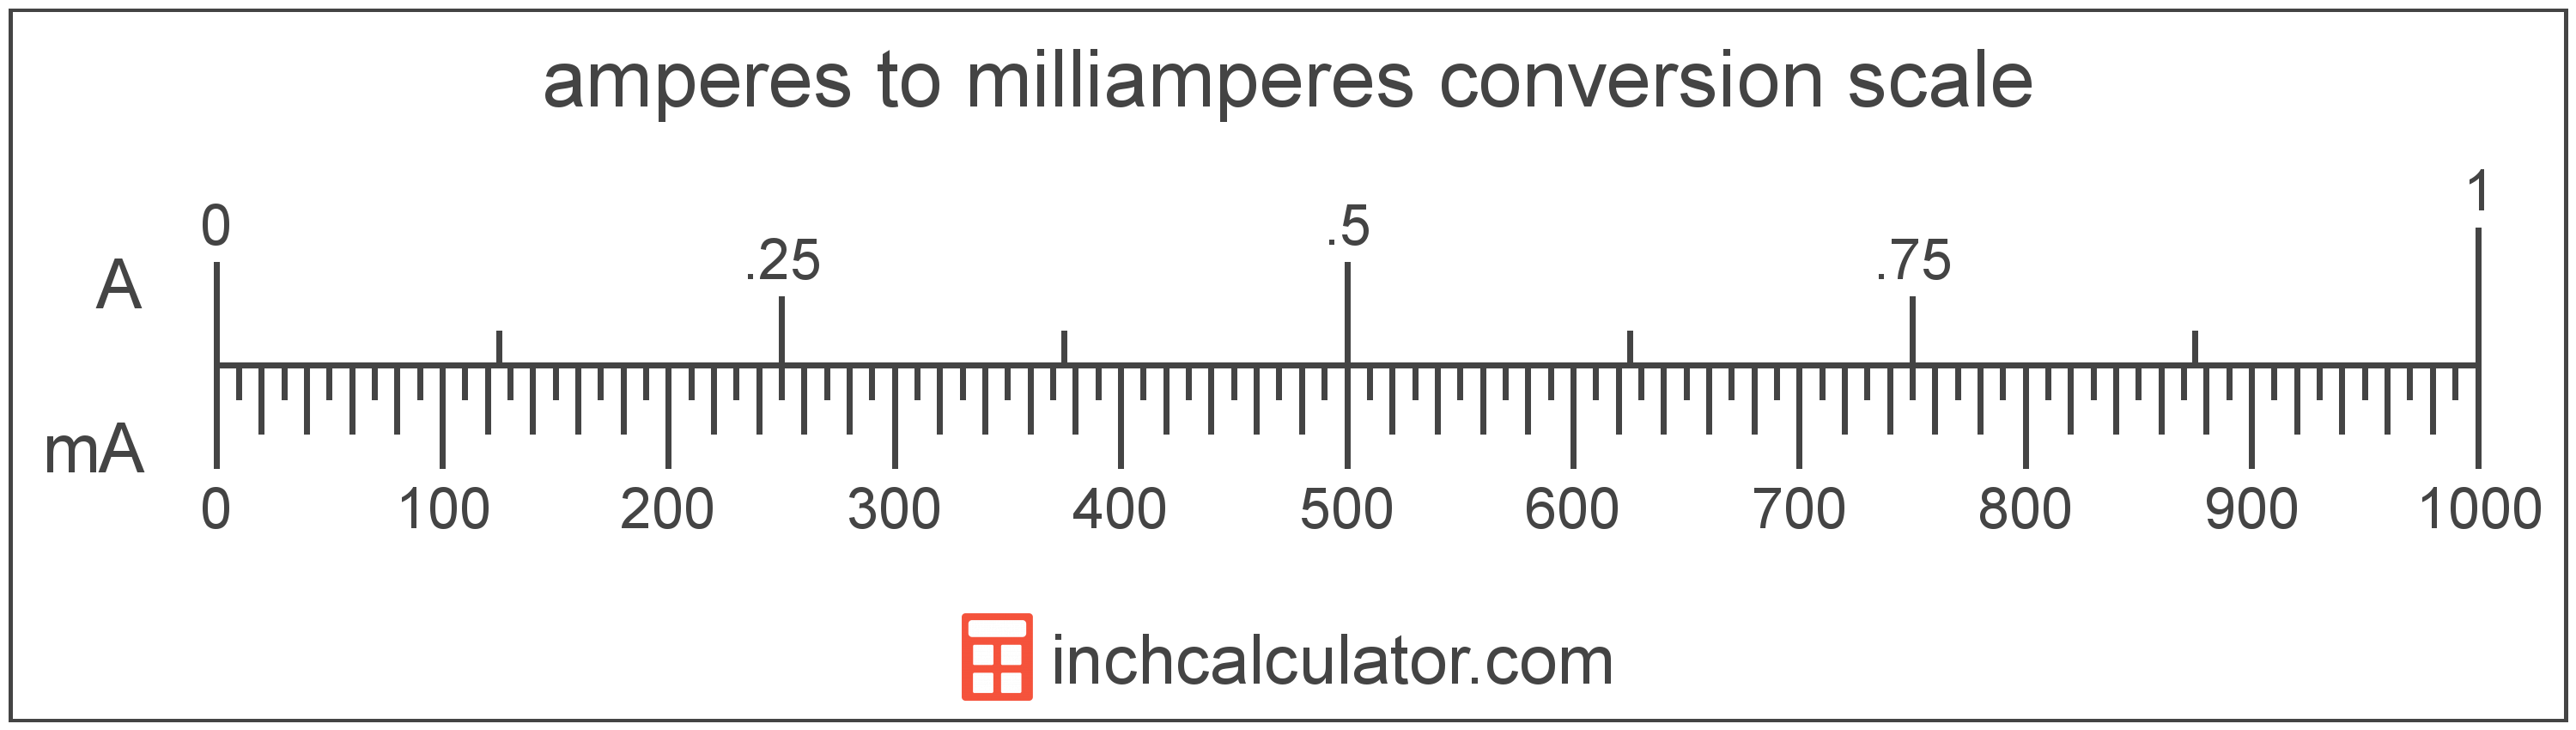 conversion scale showing amperes and equivalent milliamperes electric current values